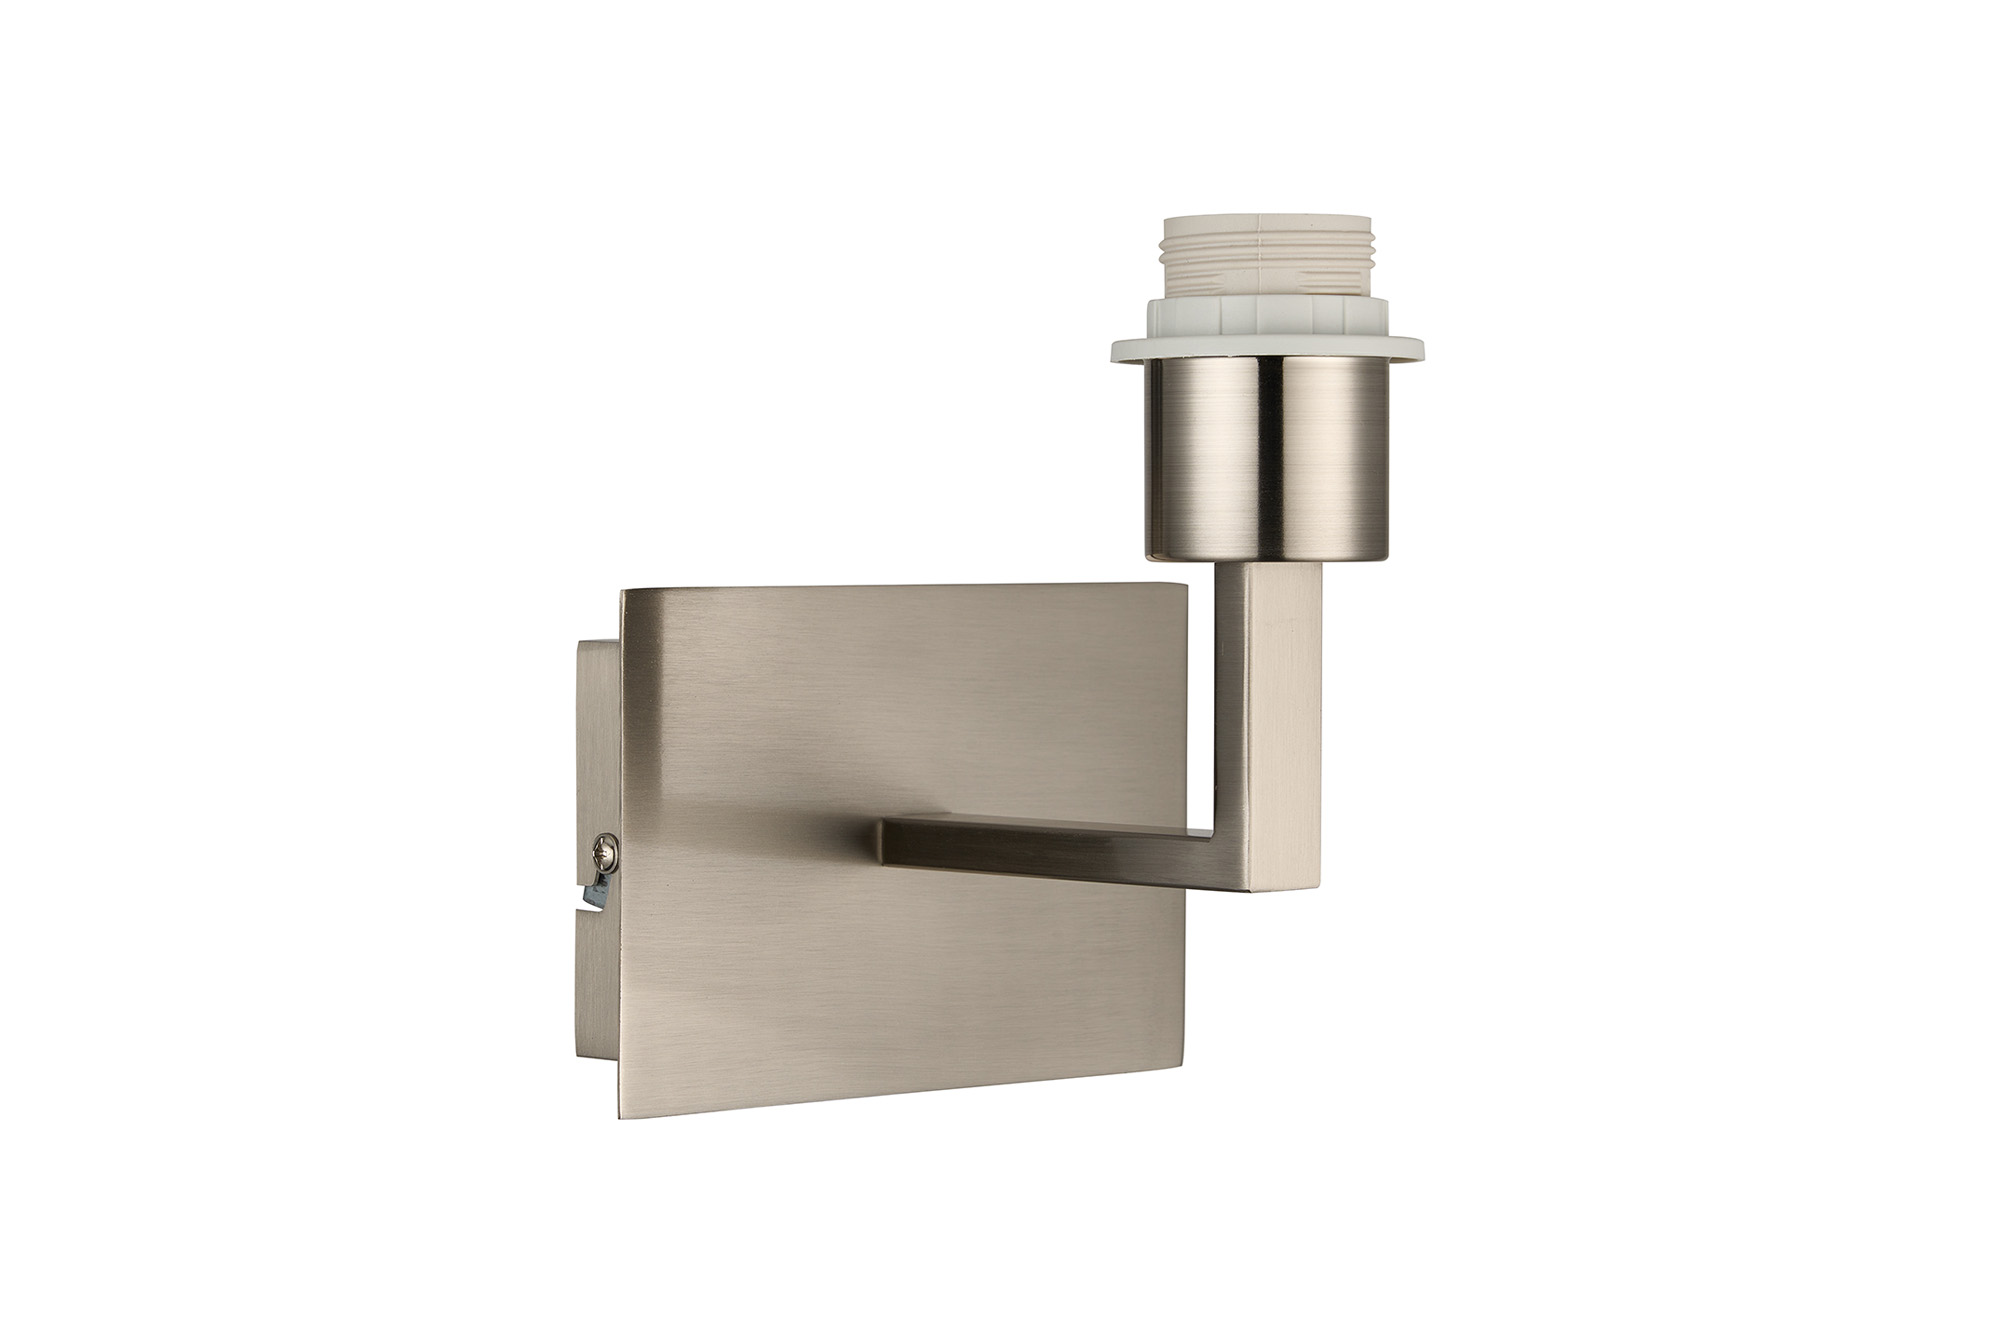 D0886SN  Clara 1 Light Wall Lamp Switched (FRAME ONLY); Satin Nickel